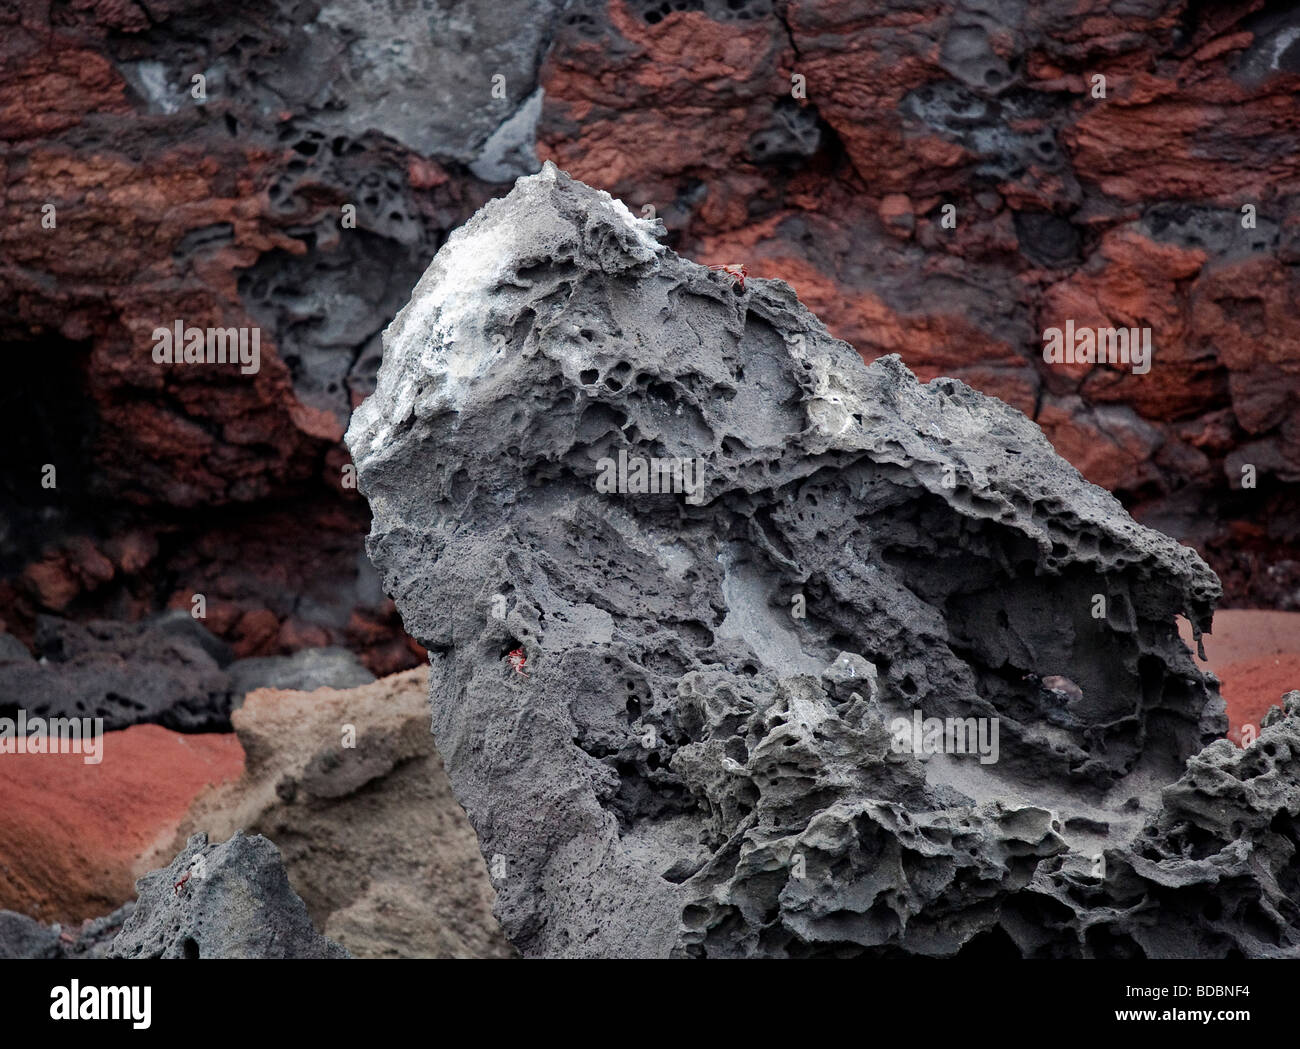 Iron-rich deposits in the volcanic rock give the coast of Bartolome a rich, red color. Stock Photo